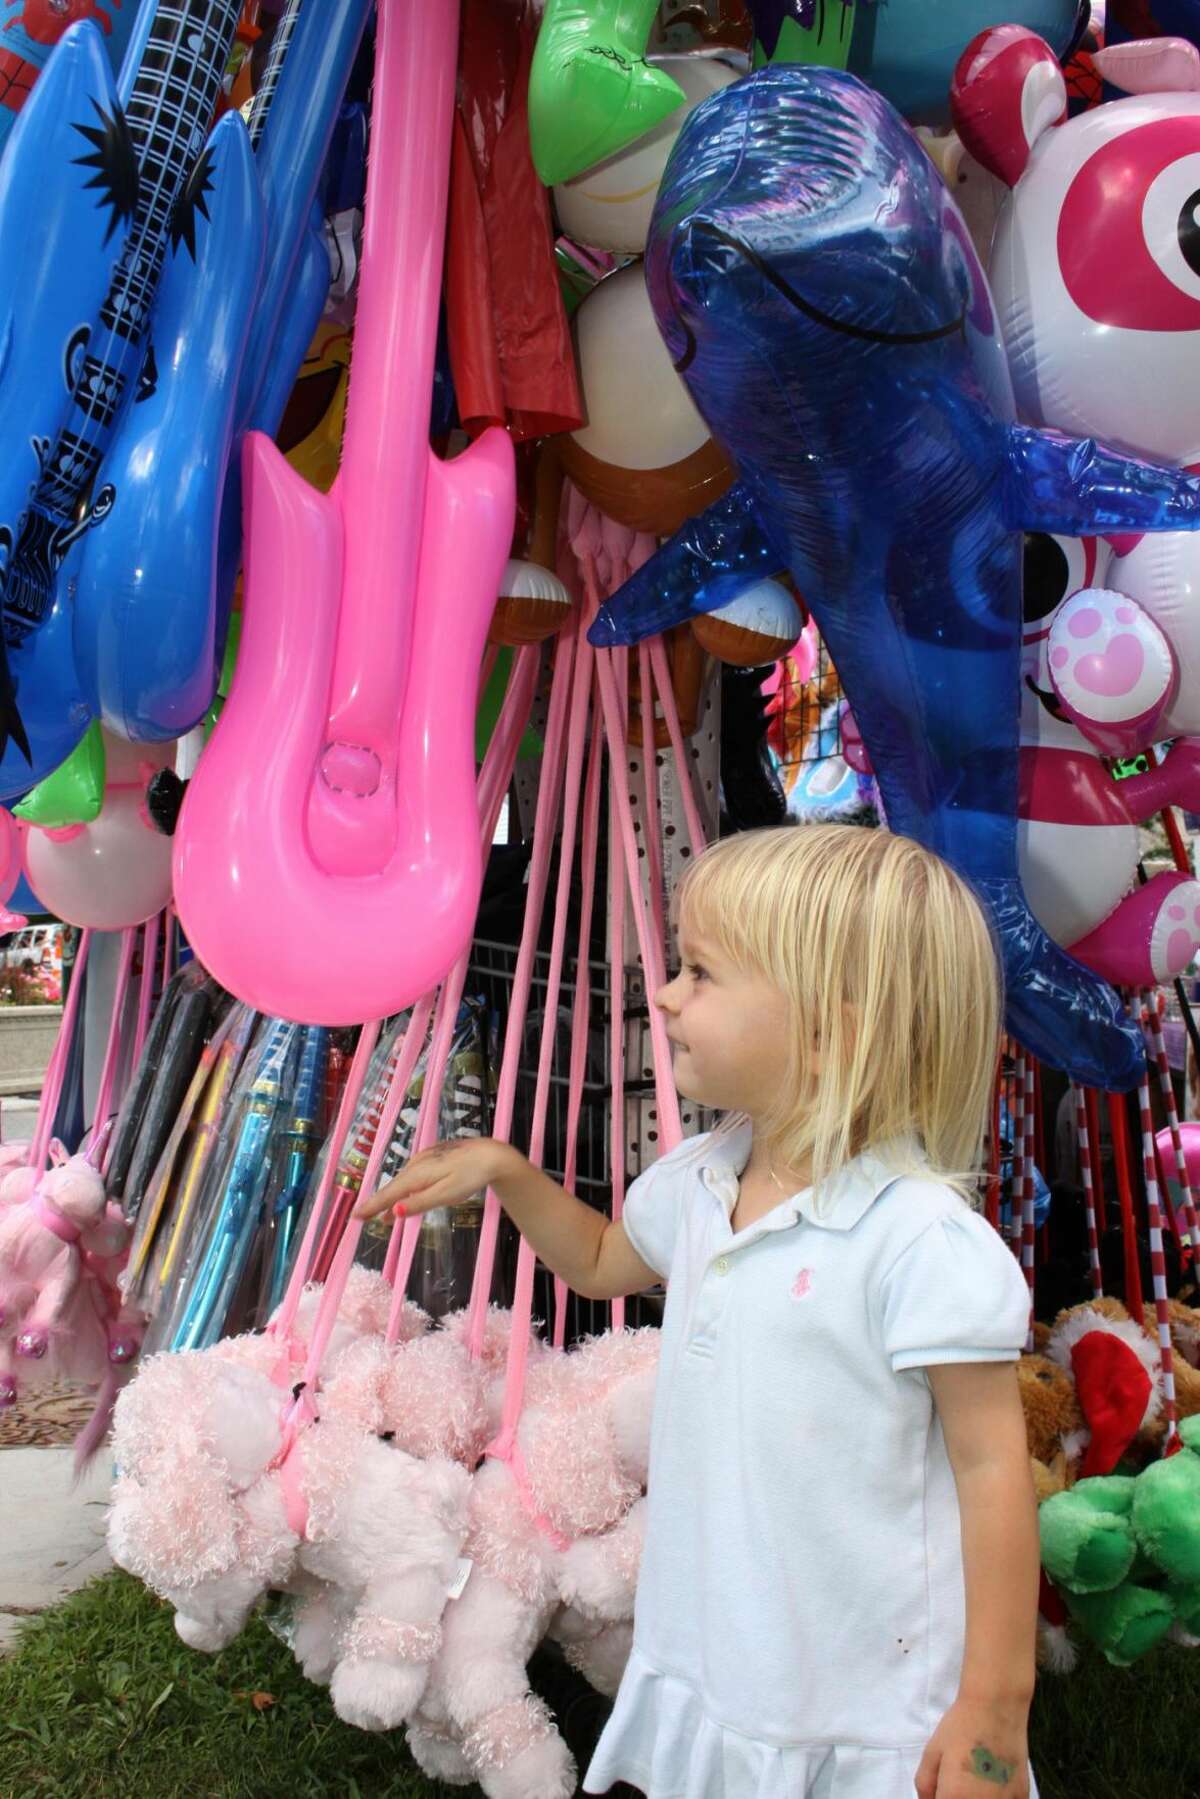 A young fair-goer at last year's Village Fair Days in New Milford. File photo by Walter Kidd.